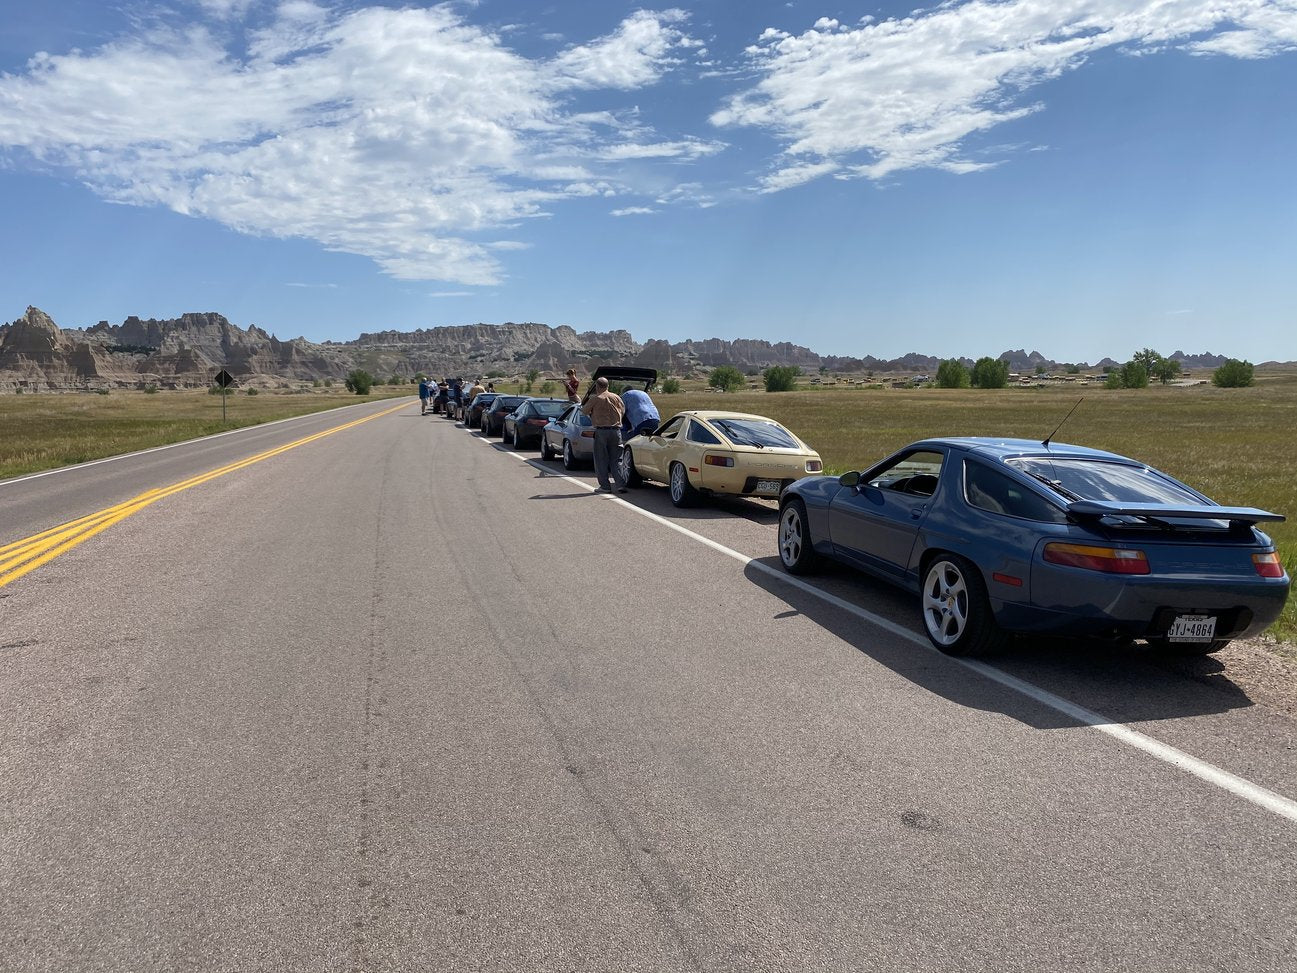 sharks in the badlands 928s event parked at the side of the road